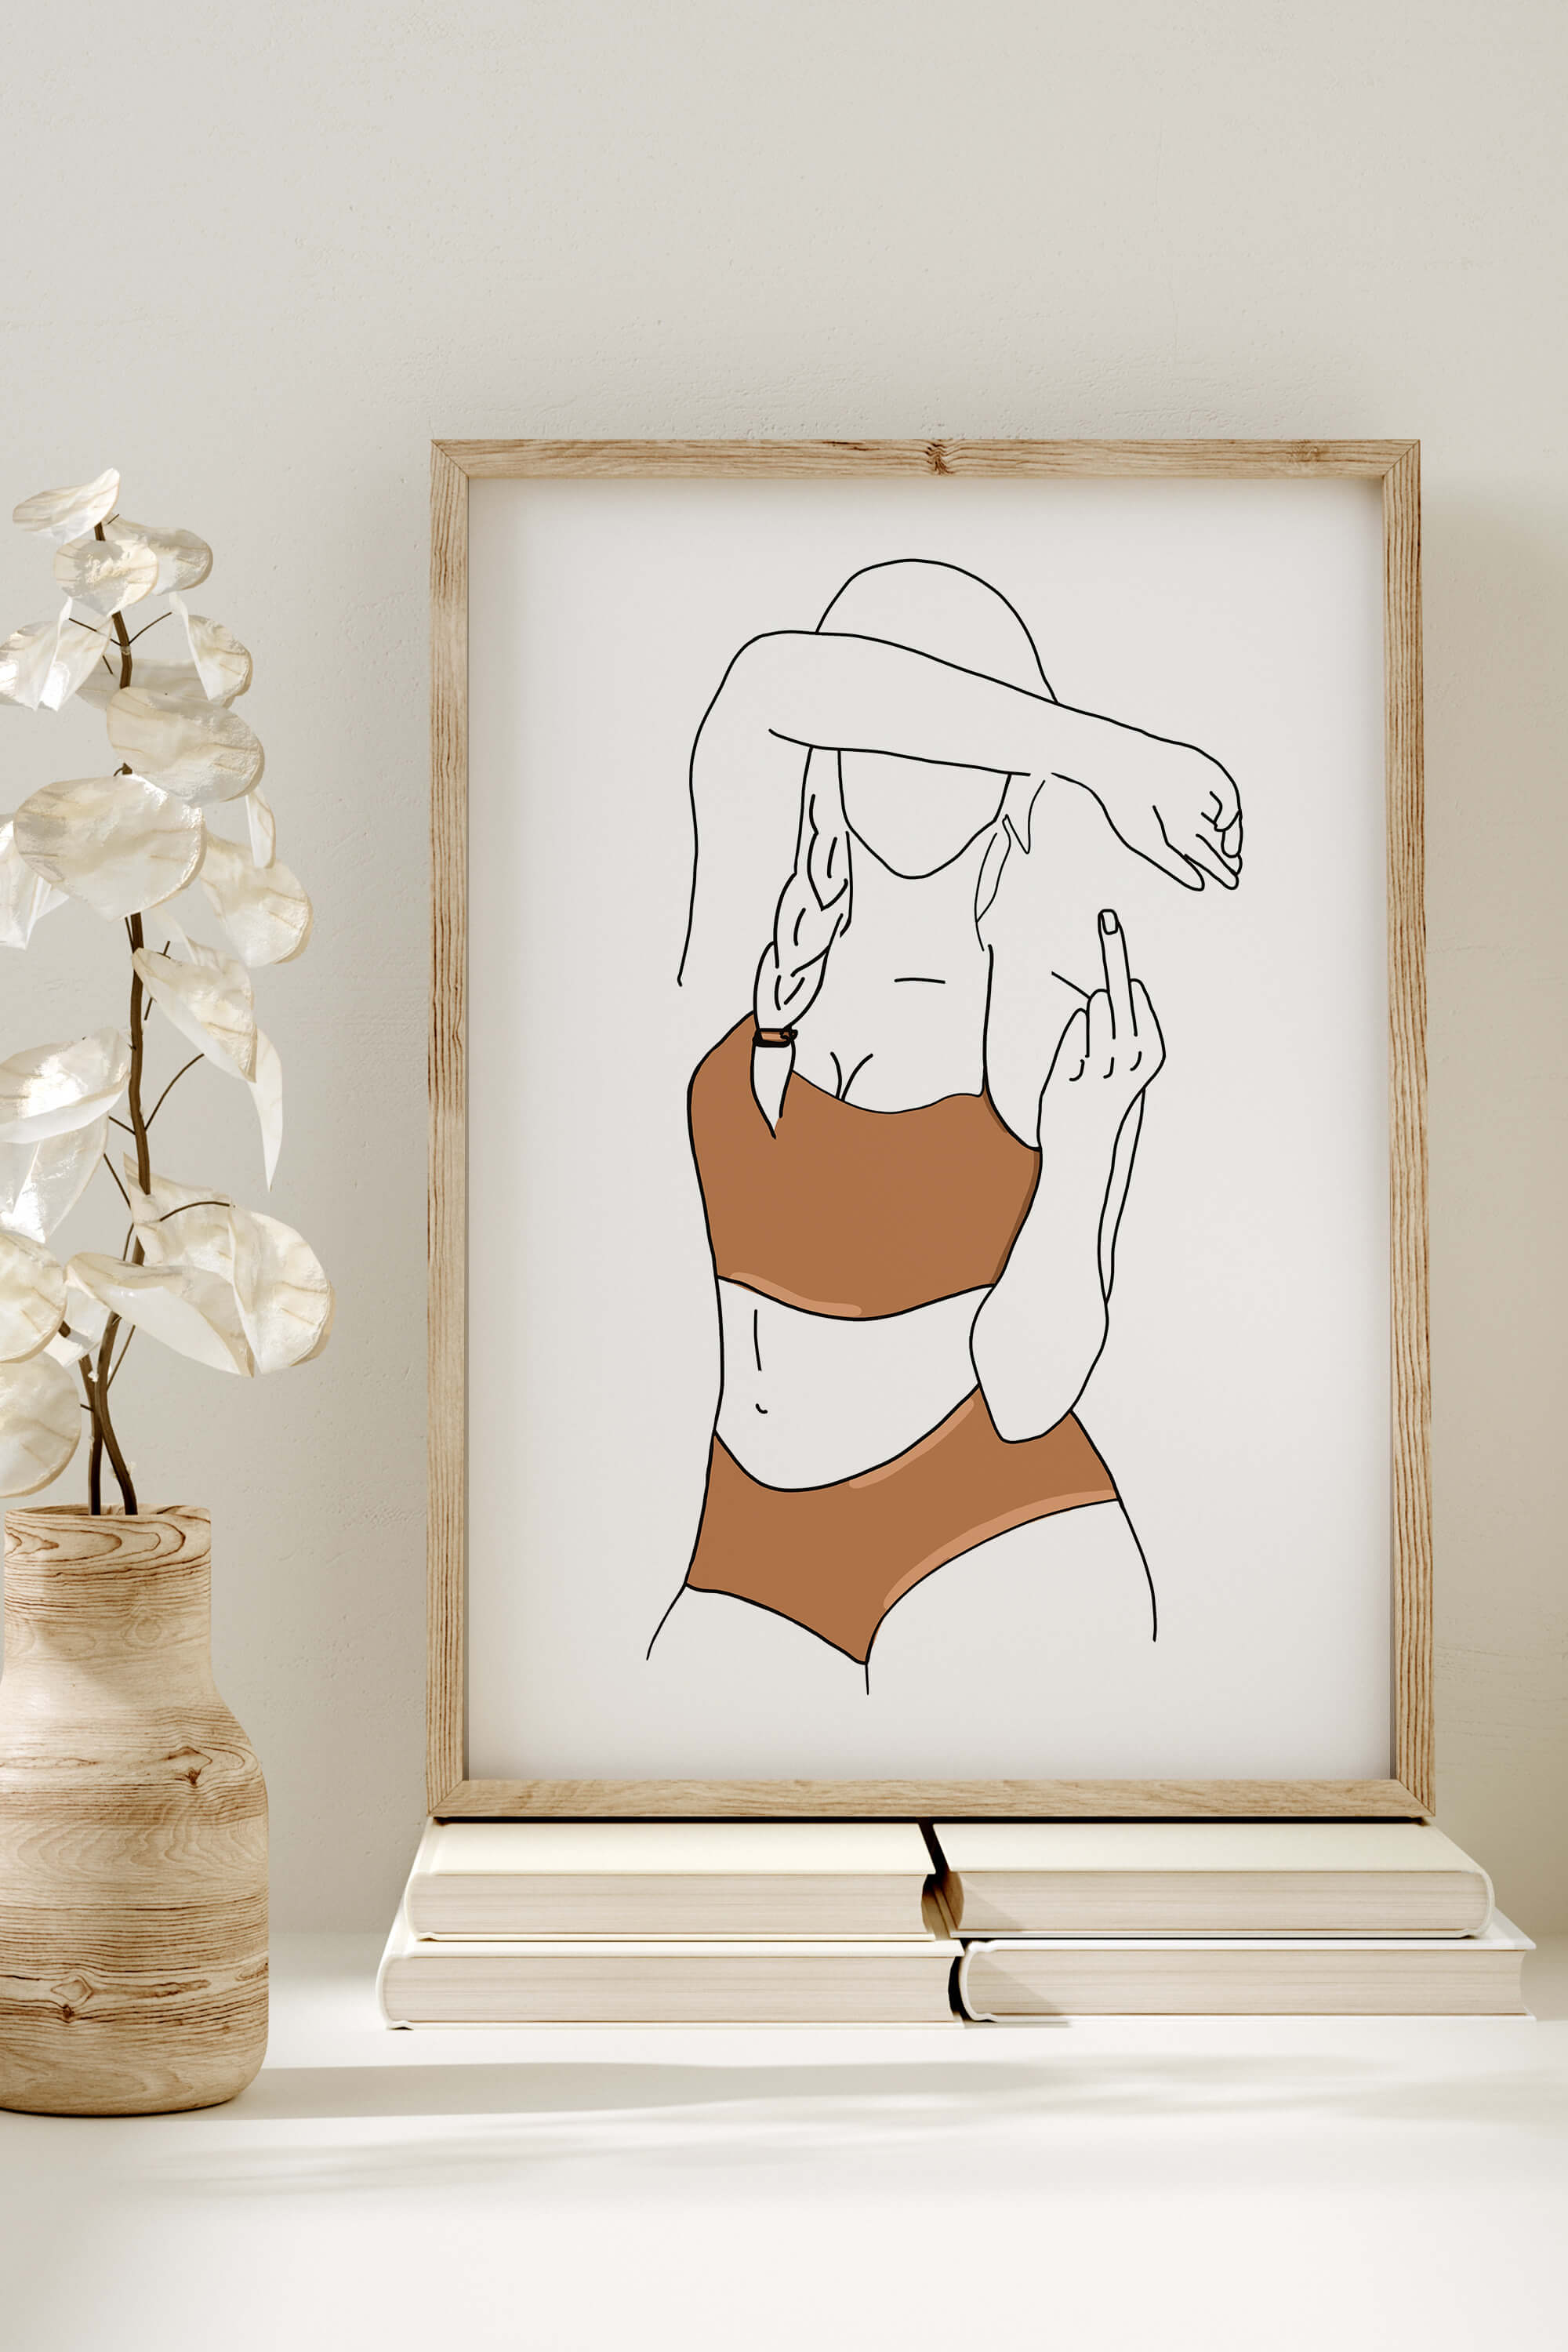 Detailed art print challenging societal norms, expressing body positivity, and symbolizing empowerment for feminist wall decor.